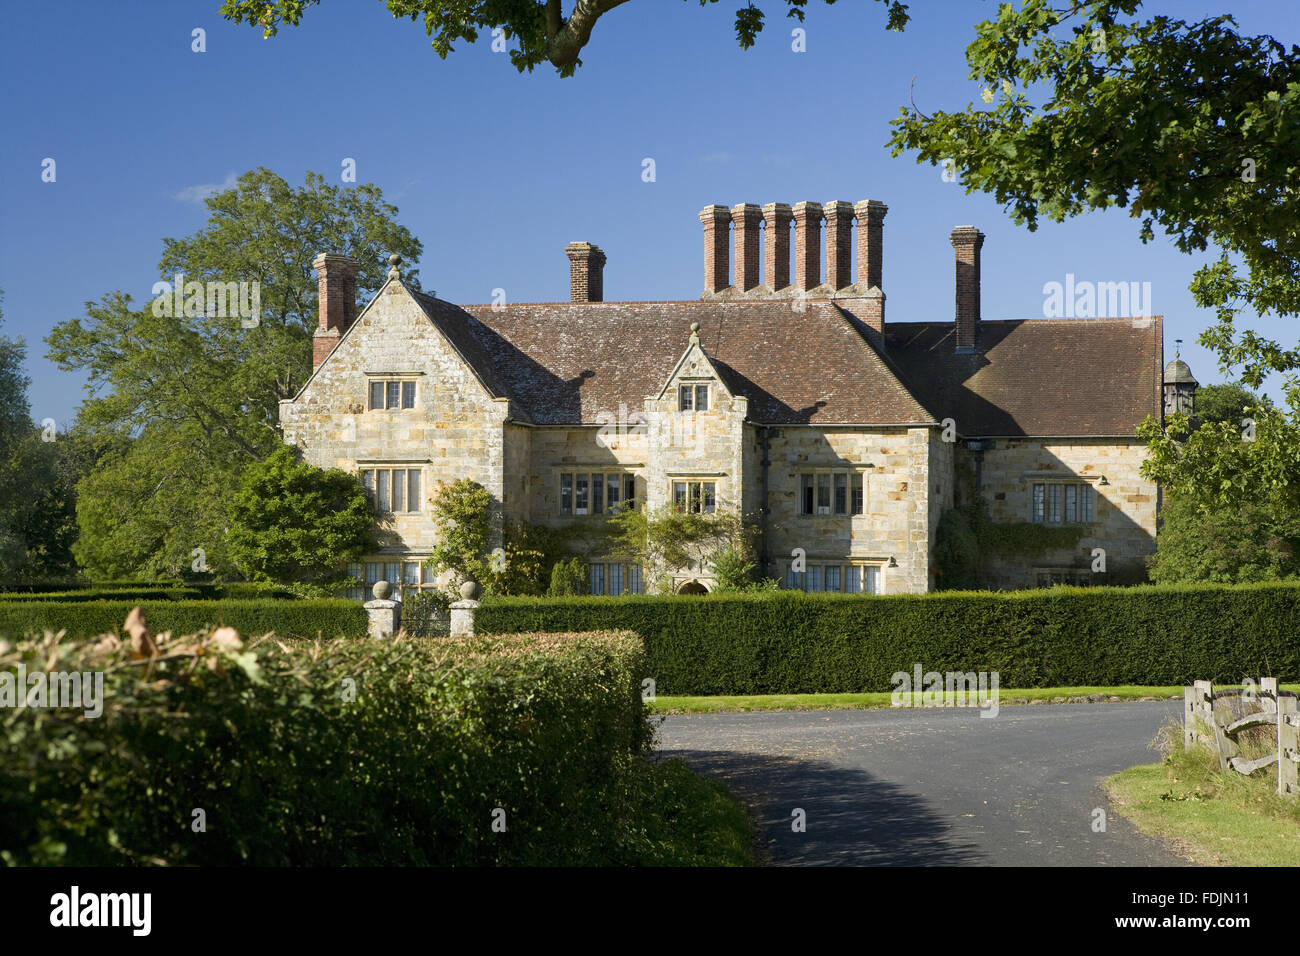 Rudyard Kipling House High Resolution Stock Photography and Images - Alamy